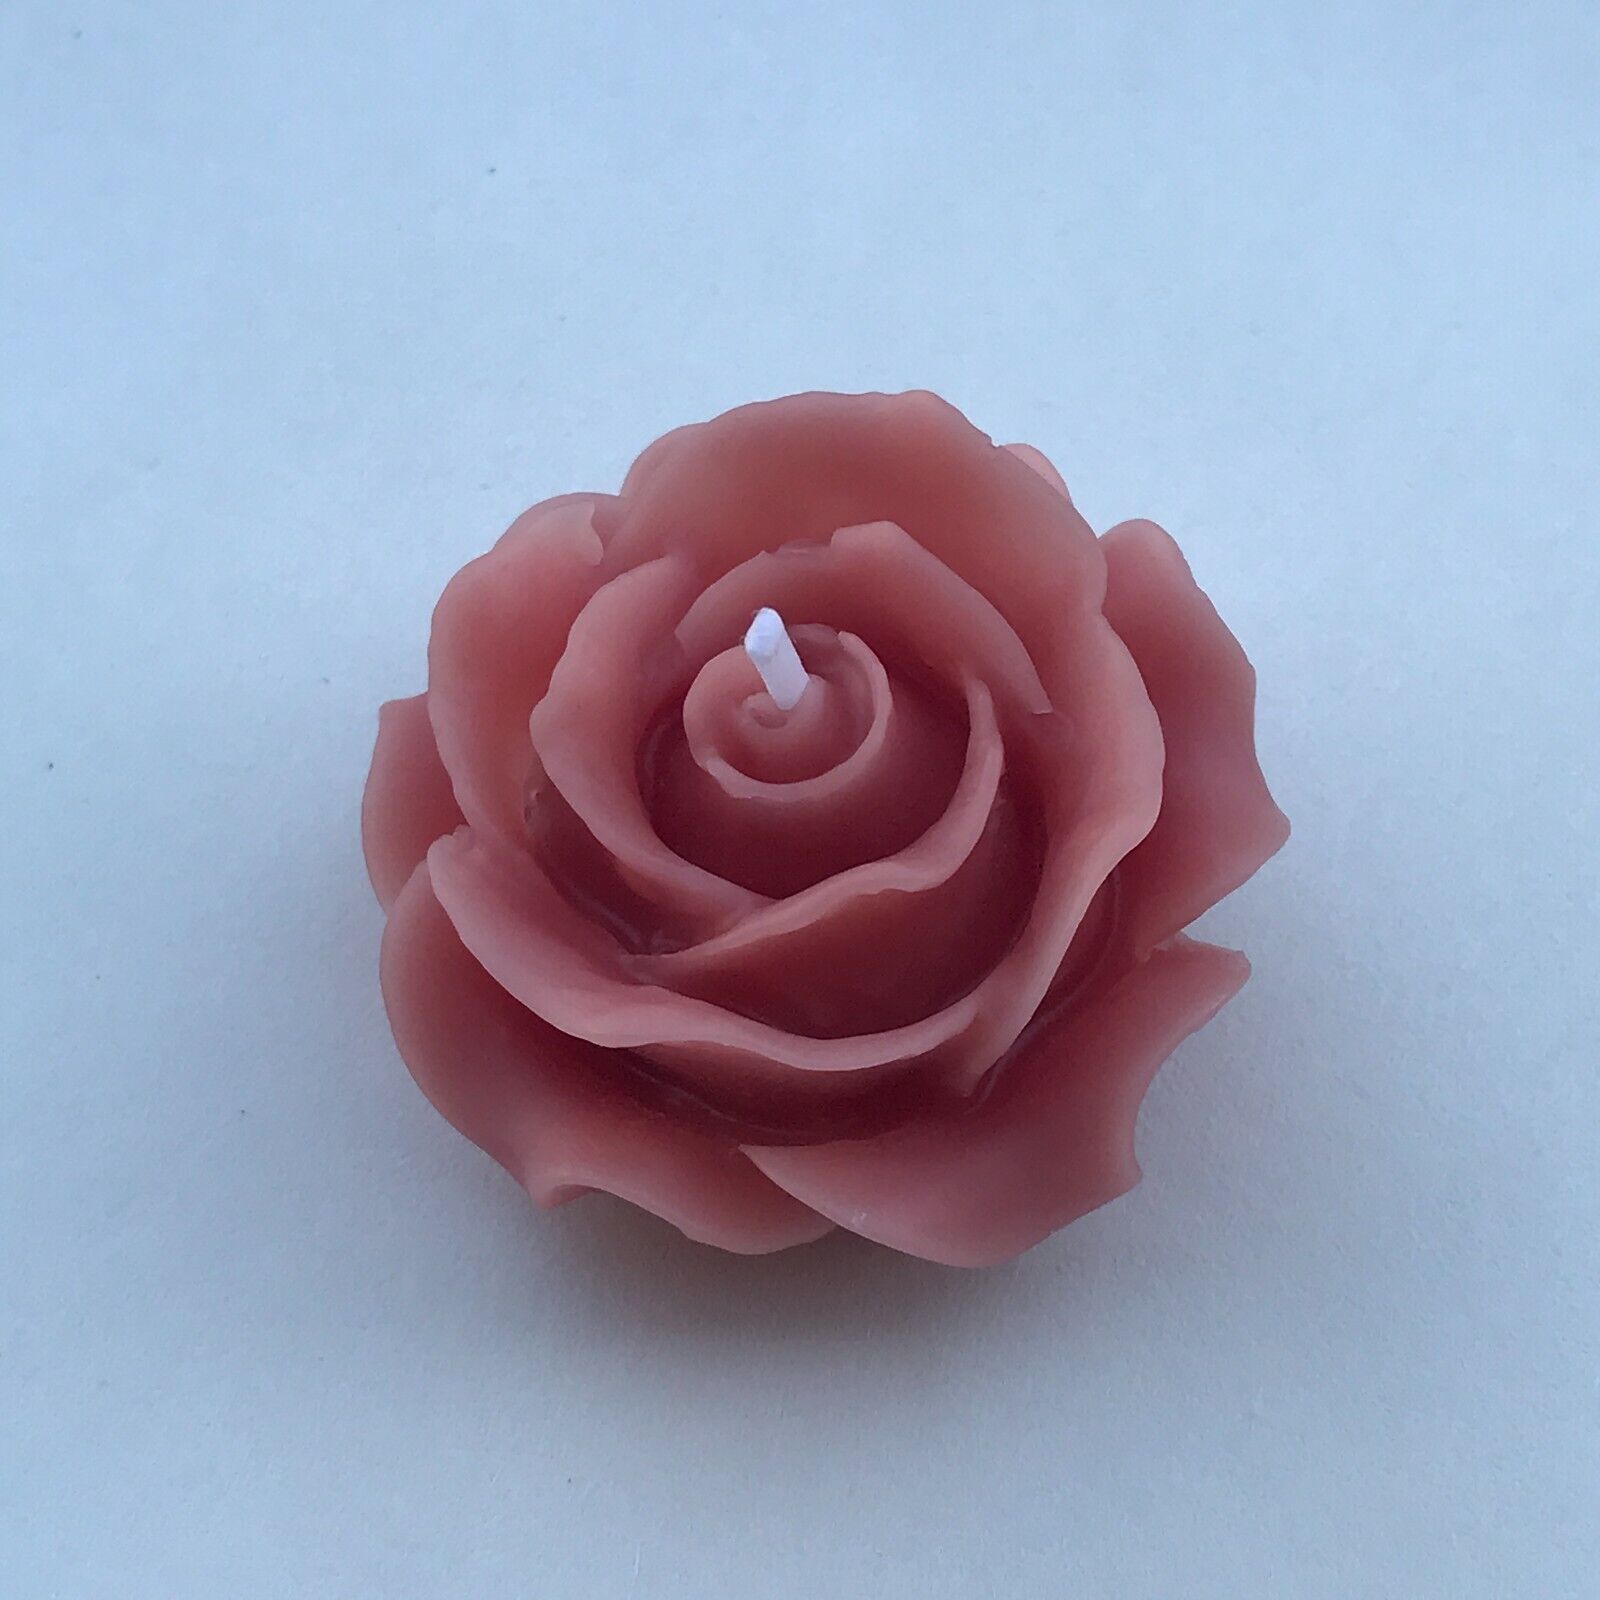 4 Set 100% Pure Natural Handmade Rose Flower Shape Beeswax Candles Cotton Wick